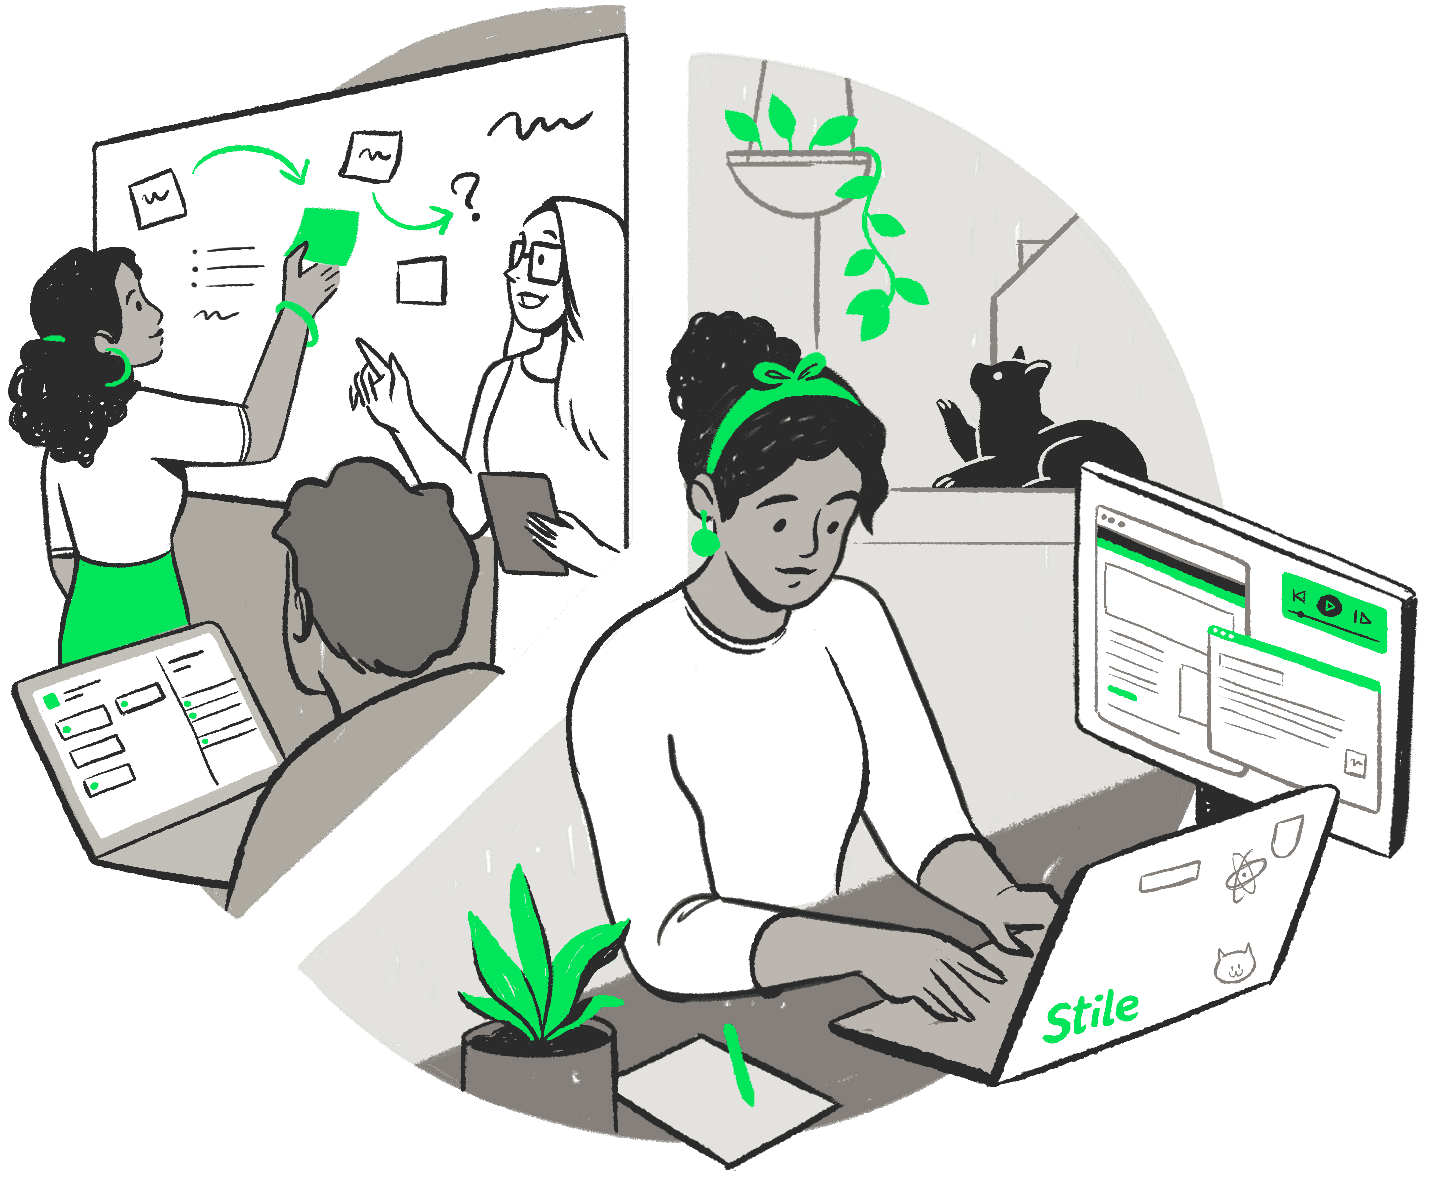 Black and white illustration with splashes of green plants showing Stile employees collaborating at a whiteboard, playing with a cat, and working on a laptop.